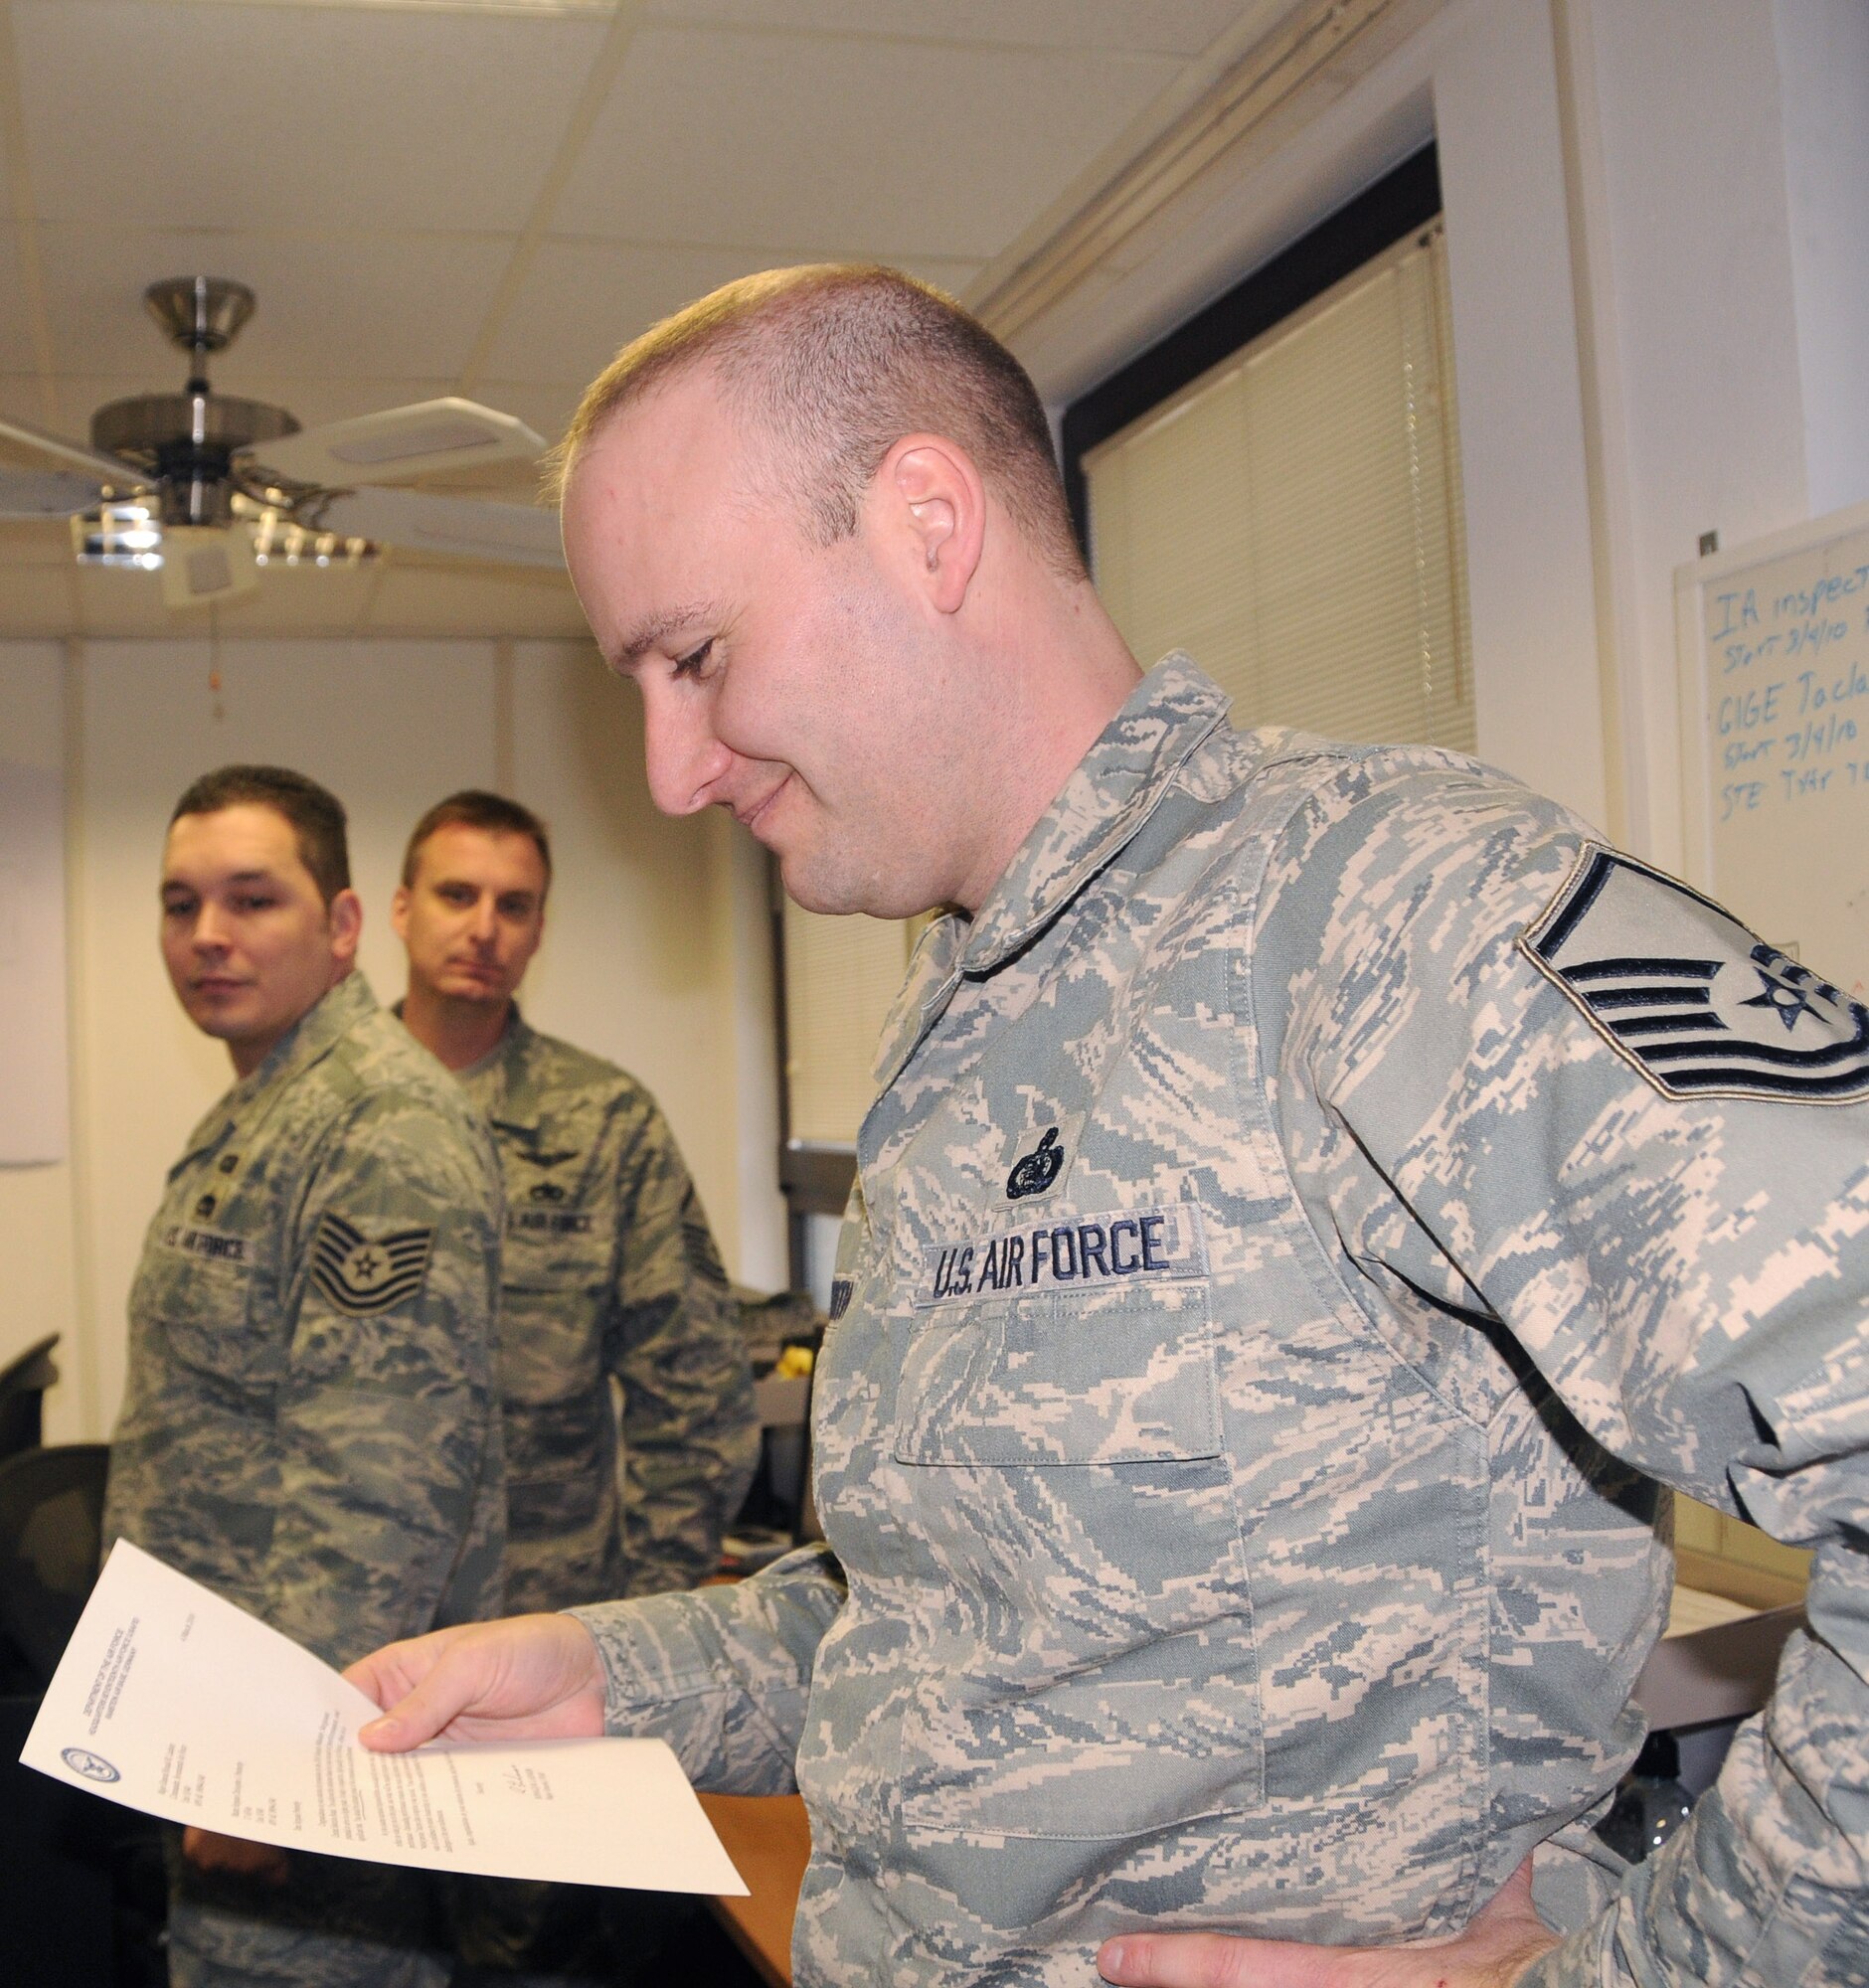 RAMSTEIN AIR BASE, Germany – Senior Master Sgt. (select) Christopher Penberthy, 17th Air Force manager of capabilities and integration, learns about his selection to E-8 by reading a congratulatory memo handed to him by Maj. Gen. Ronald Ladnier, 17th AF commander, March 5. Six master sergeants from 17th AF were selected for promotion to senior master sergeant. (U.S. Air Force photo by Staff Sgt. Stefanie Torres) 